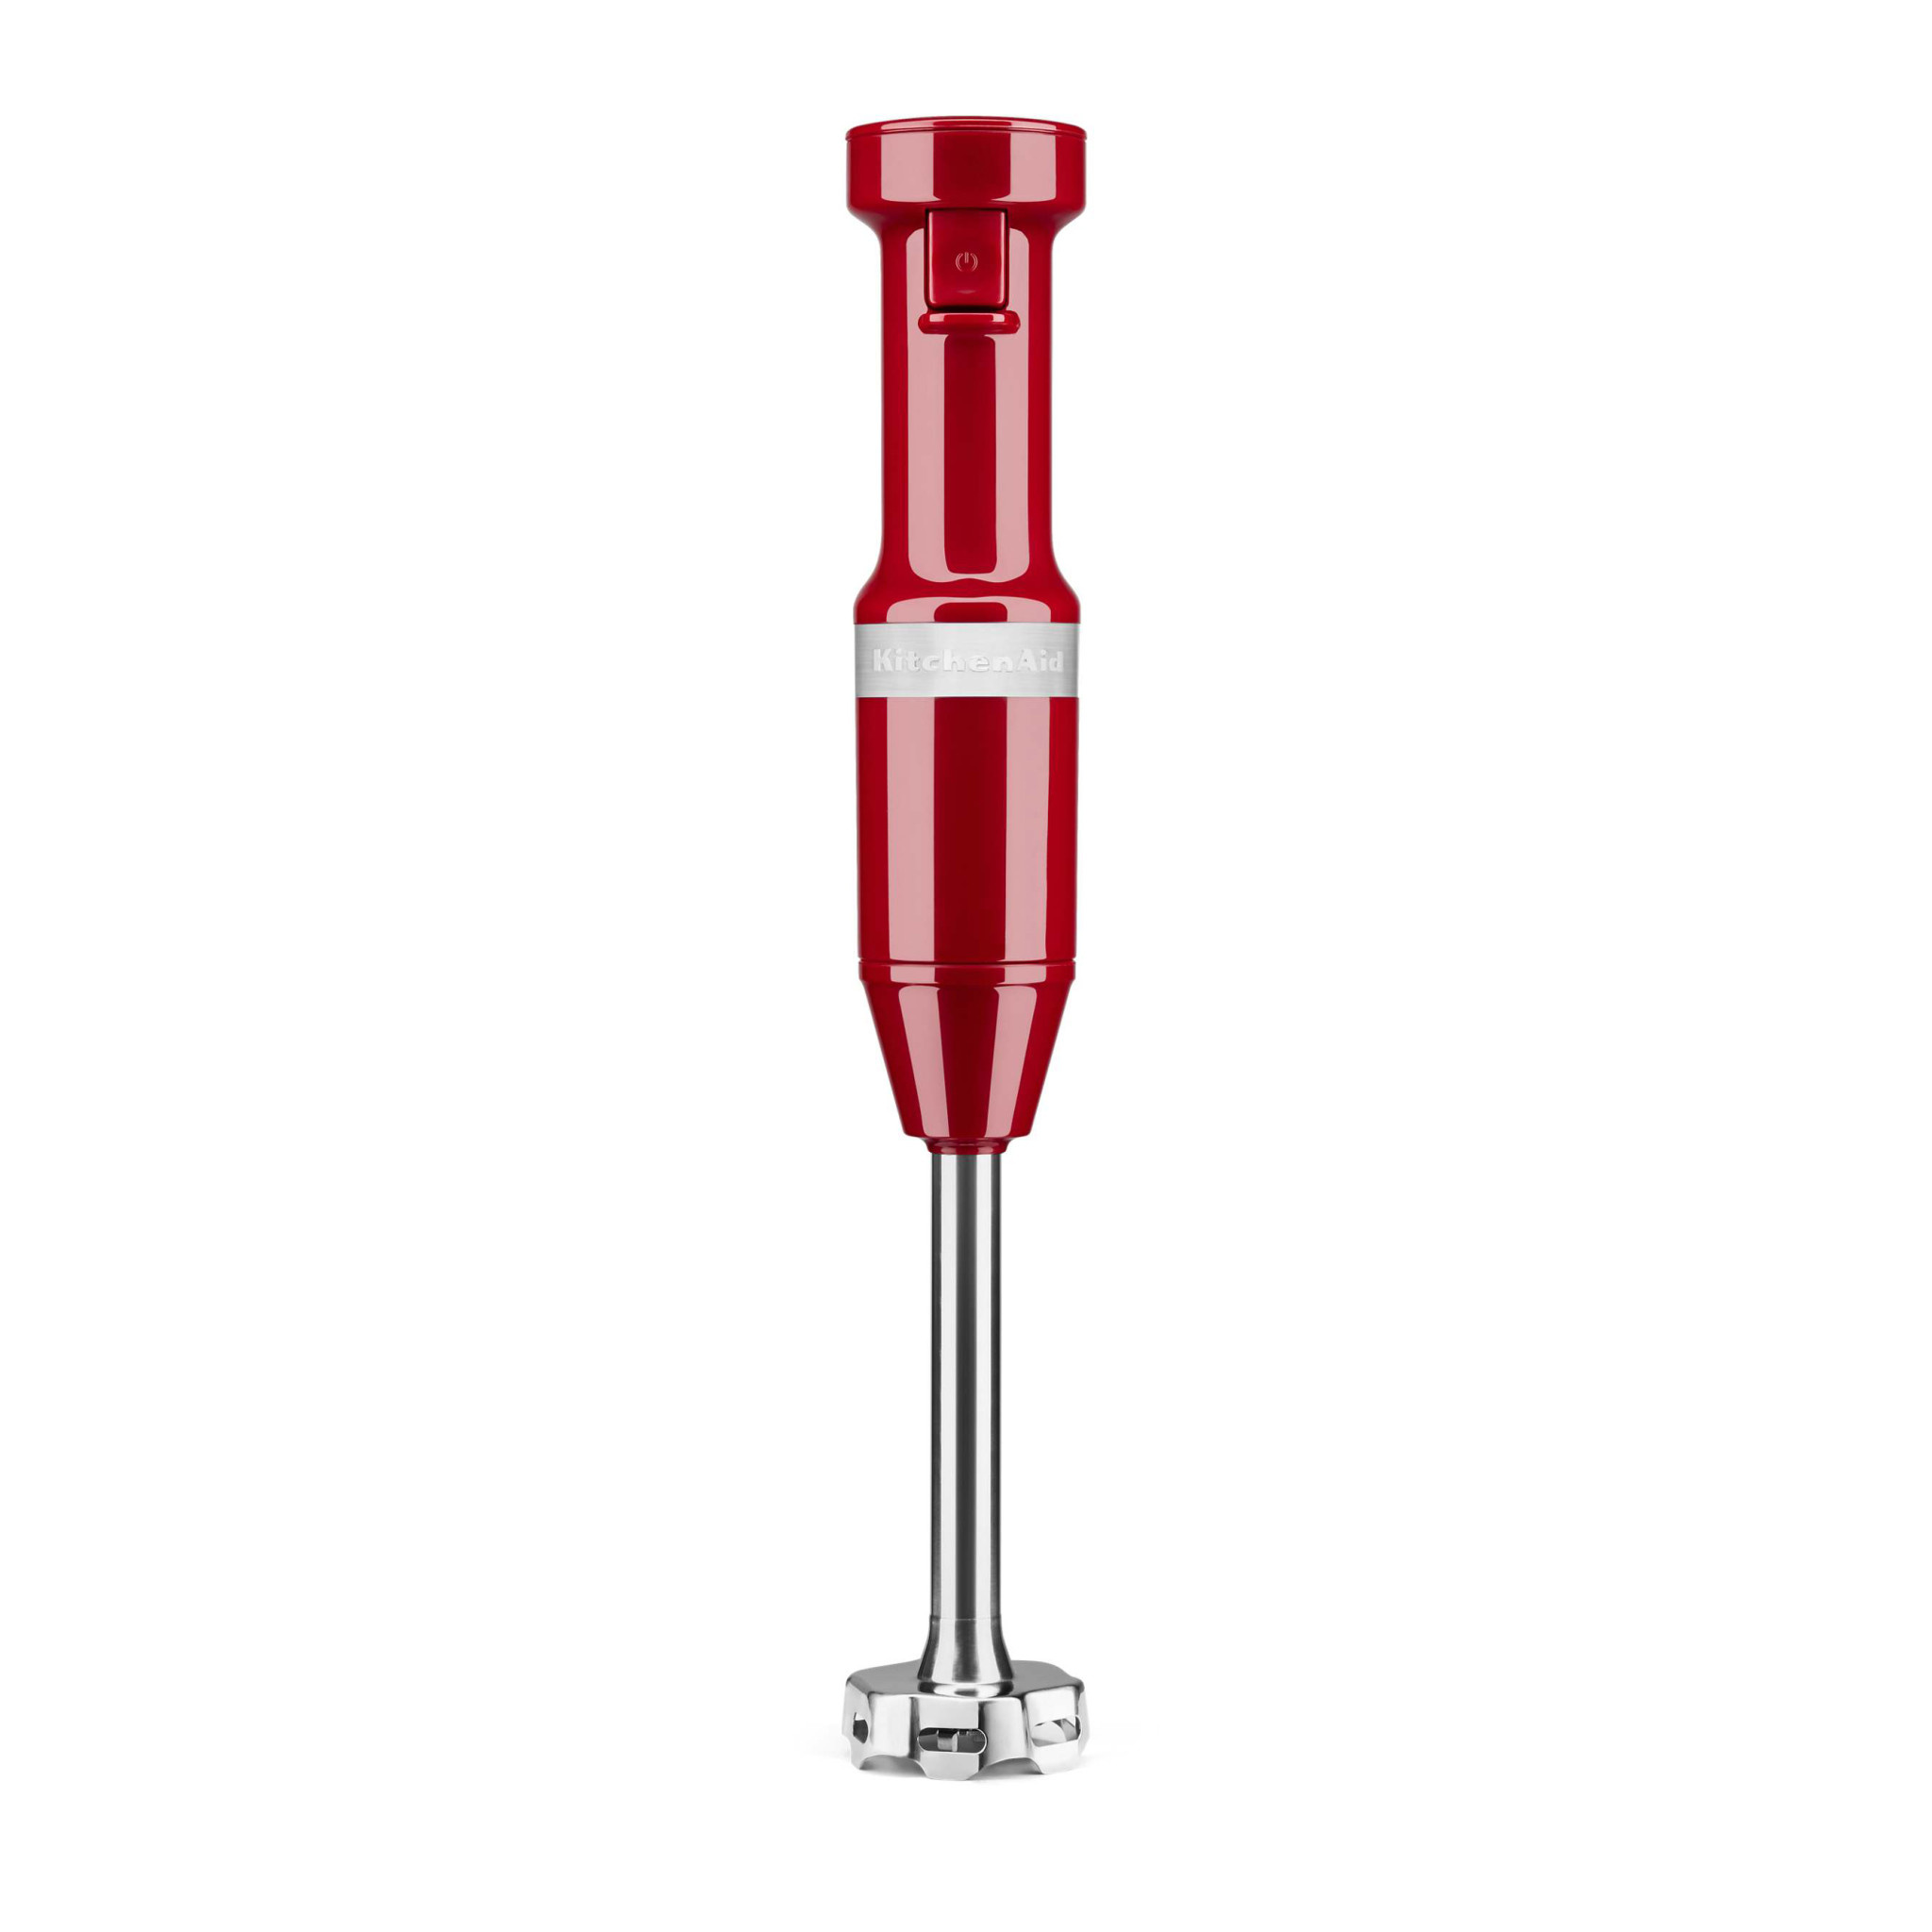 Cordless Variable Speed Hand Blender with Chopper and Whisk Attachment